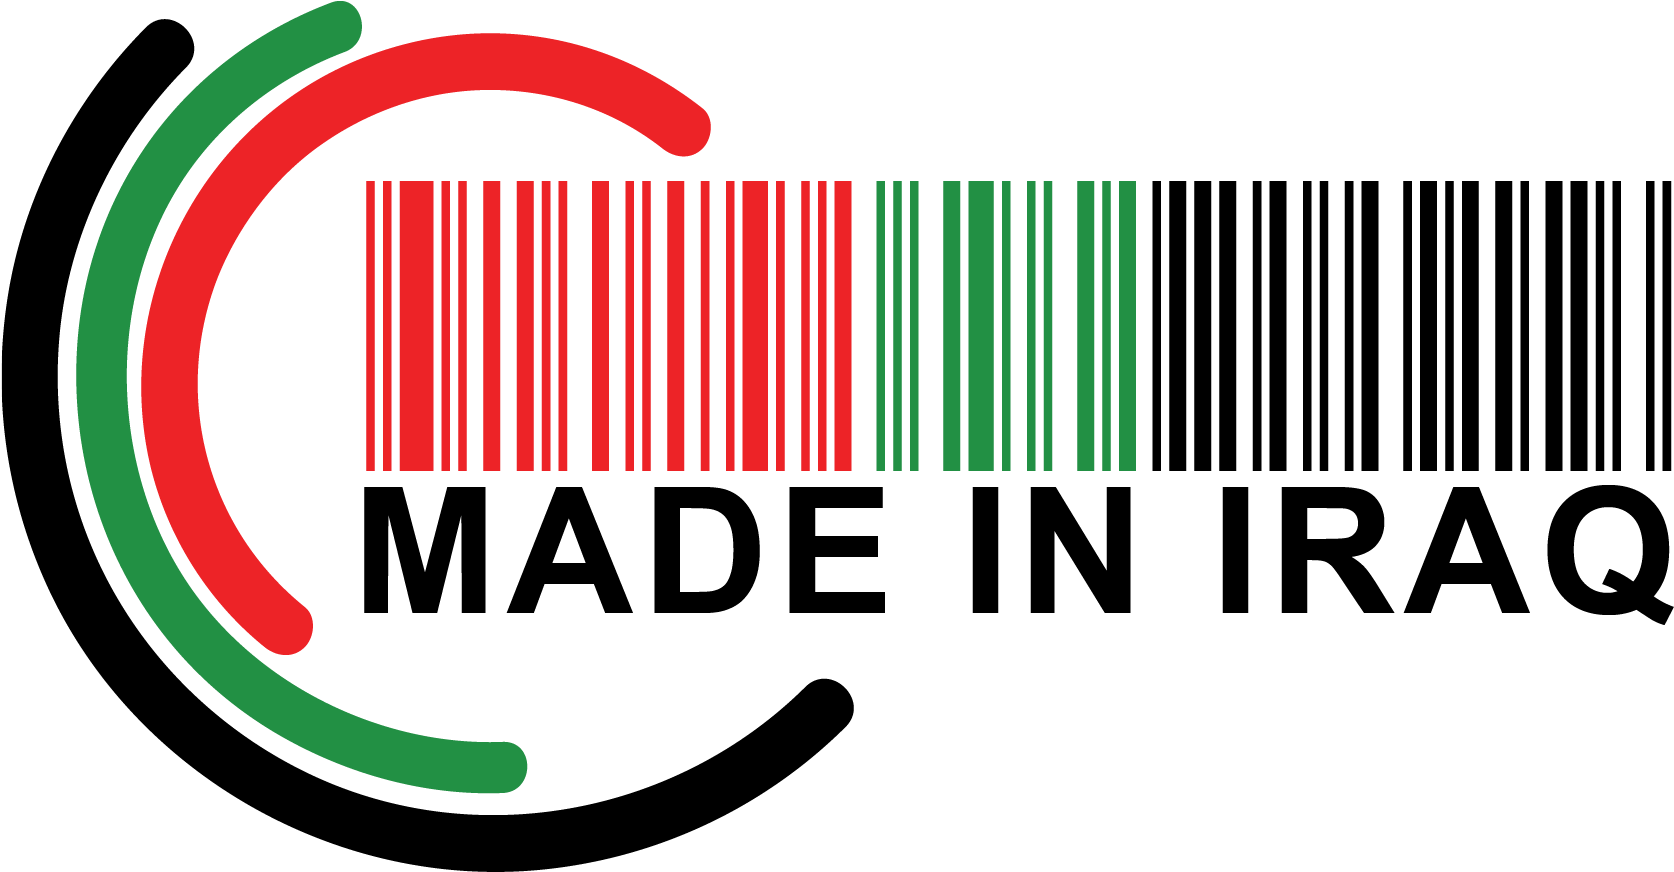 A Red And Green Barcode On A Black Background